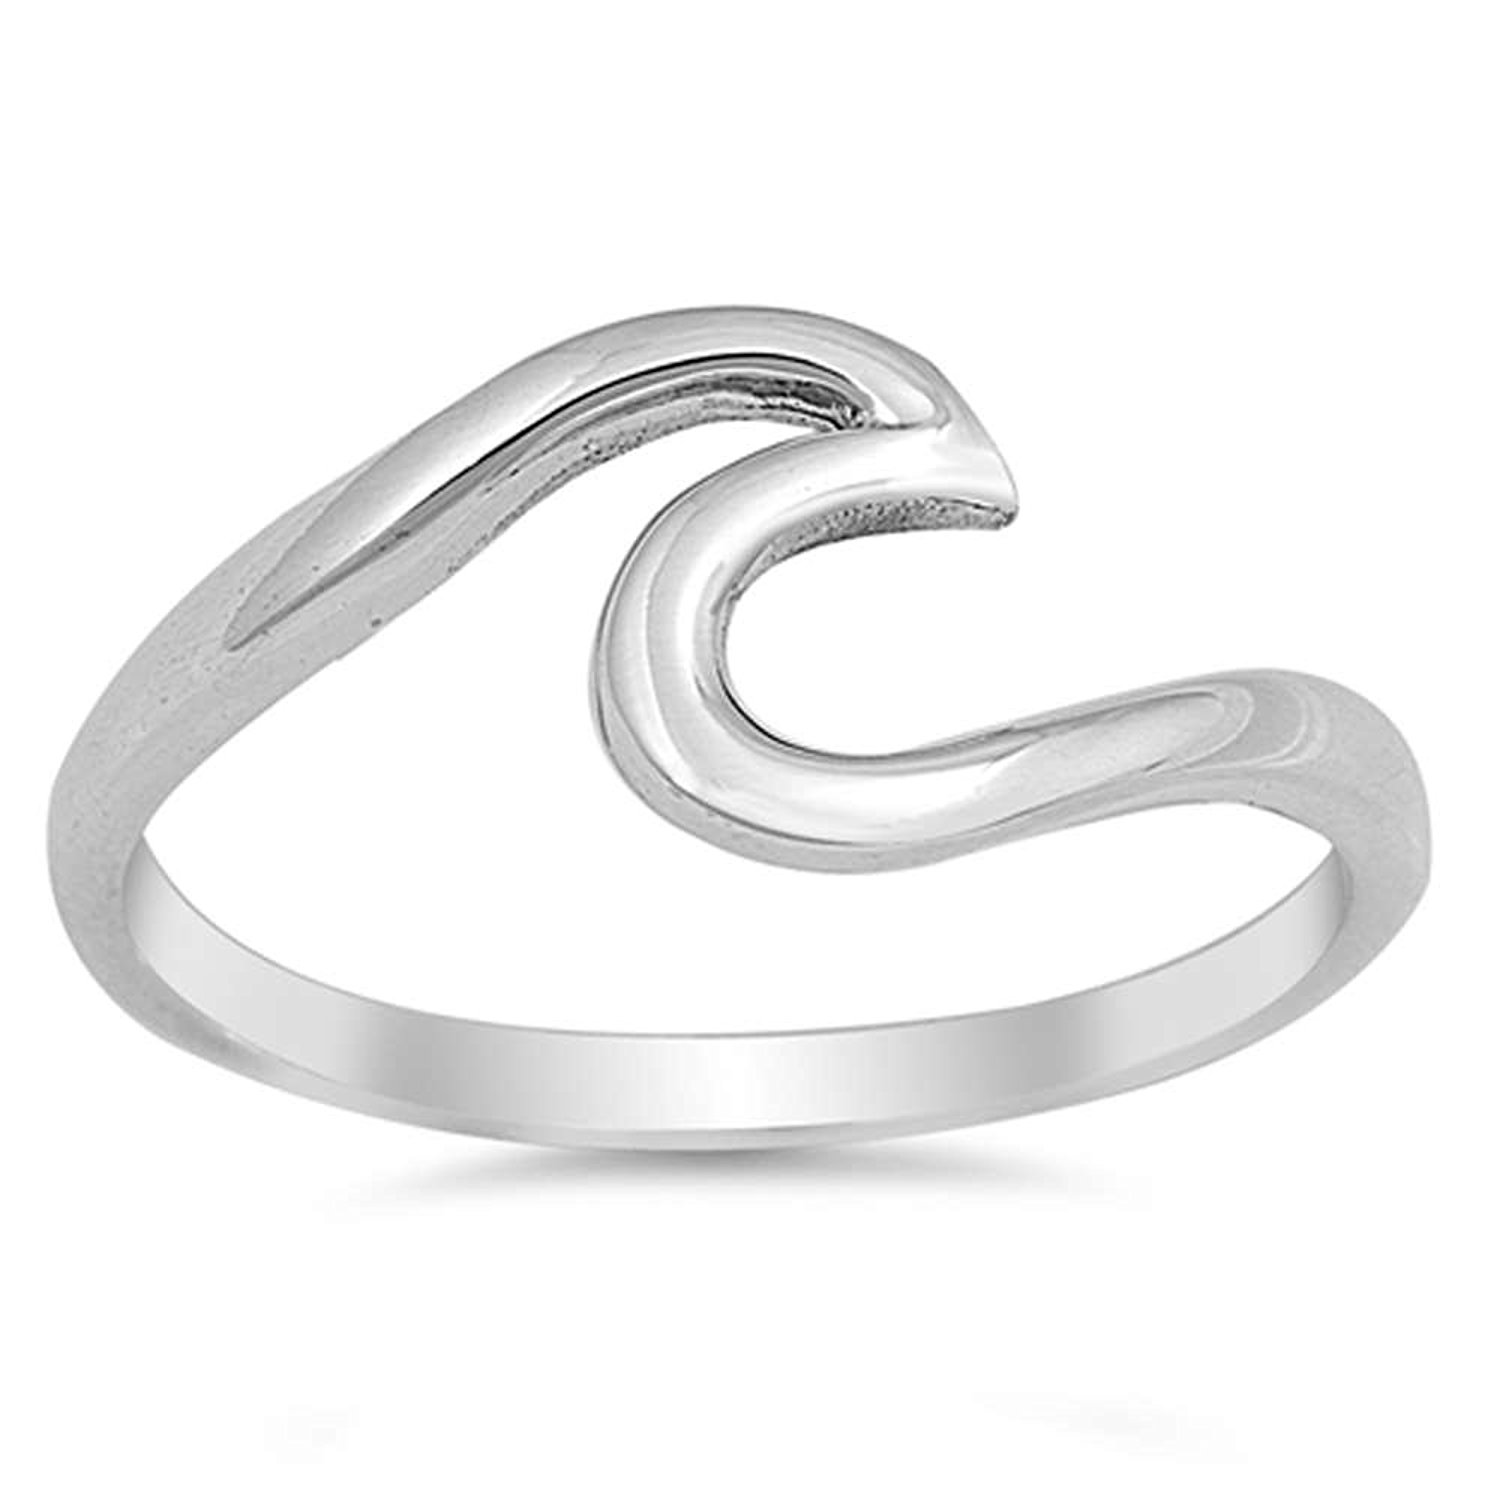 Amazon.com: Wave Design .925 Sterling Silver Ring Sizes 2-12 CHOOSE ...